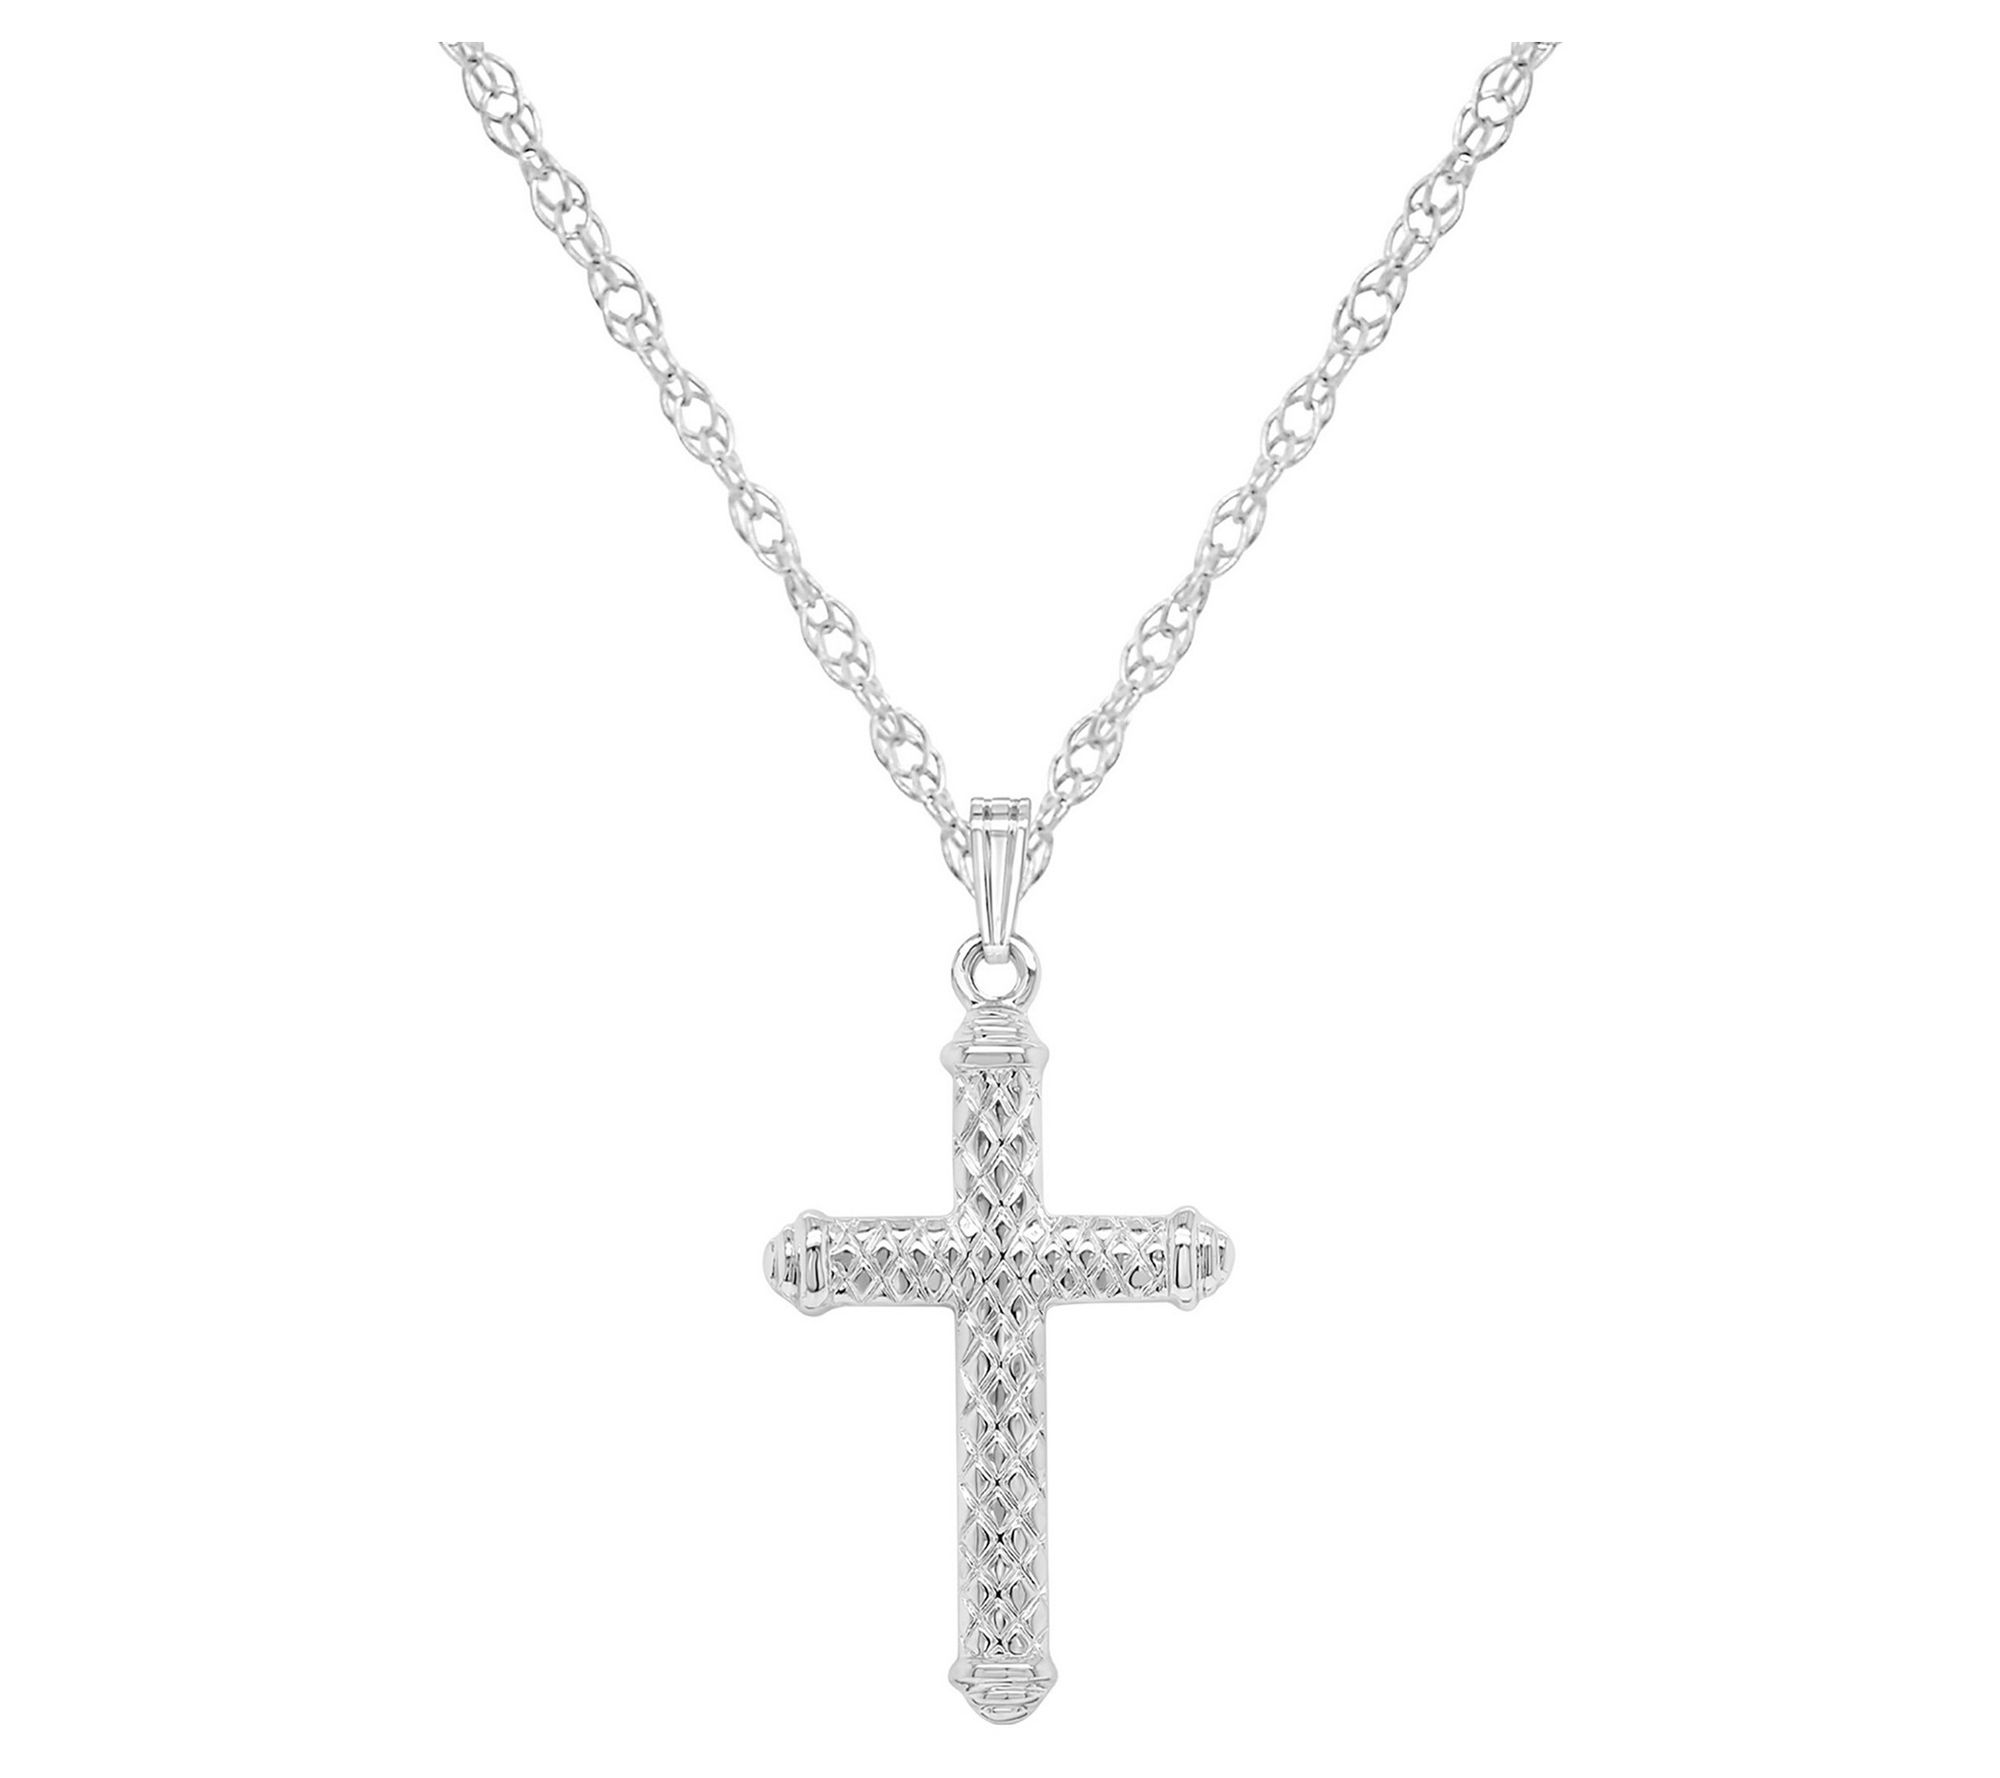 Textured Cross Pendant w/ Chain, Sterling Silver - QVC.com